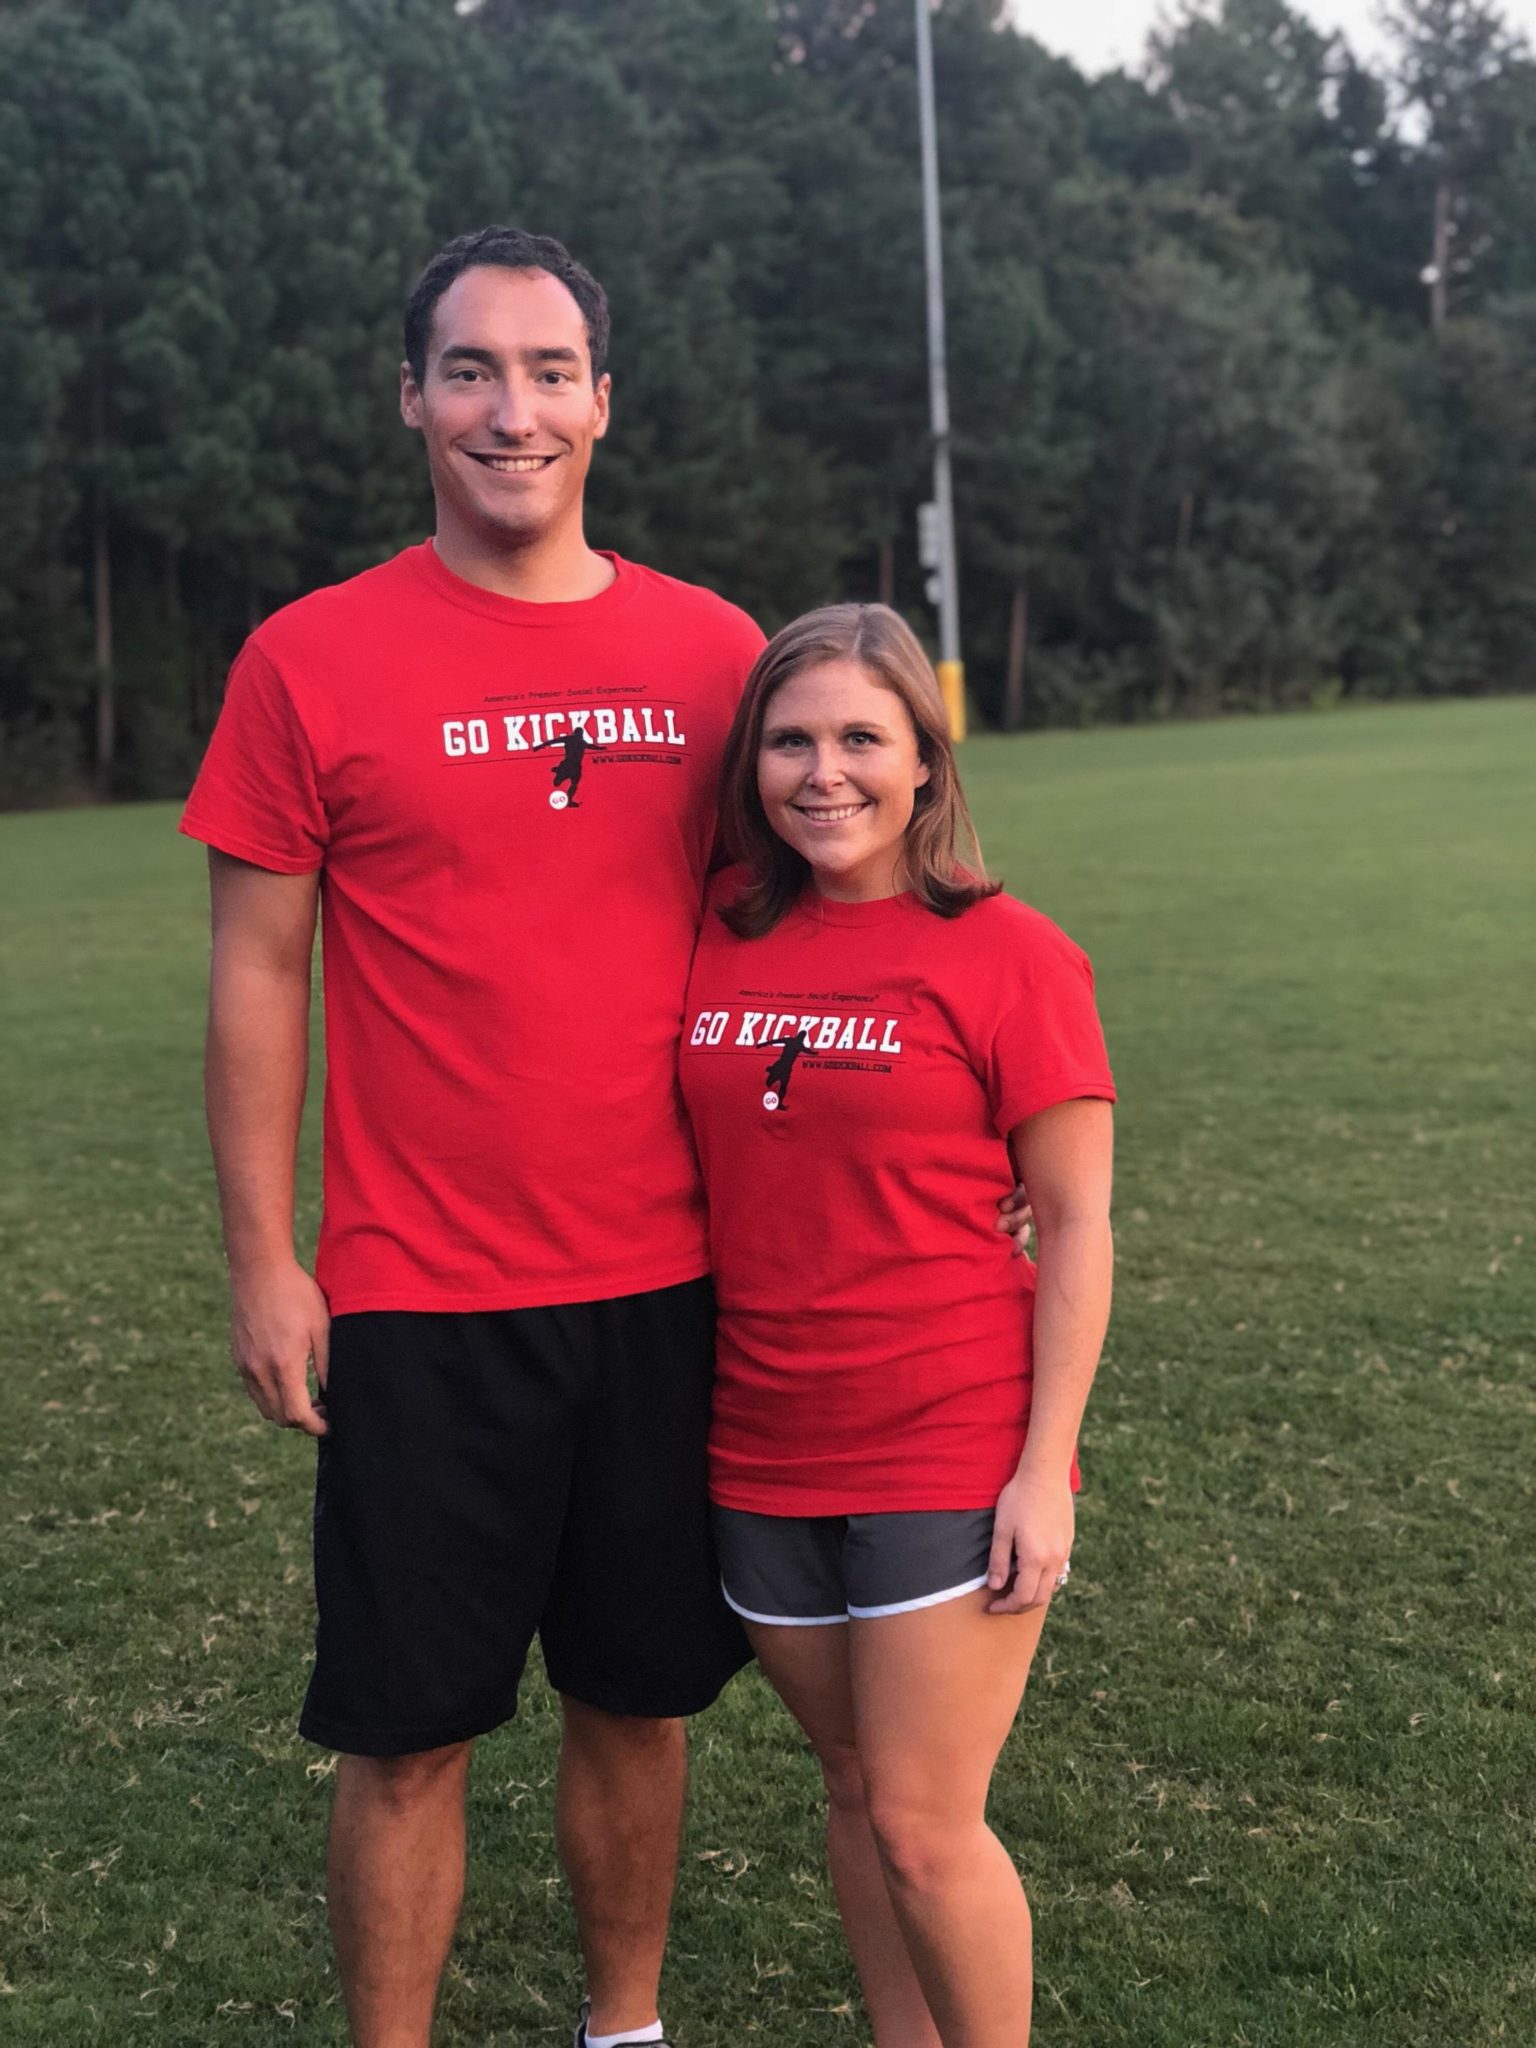 Man and girl in go kickball T-shirts